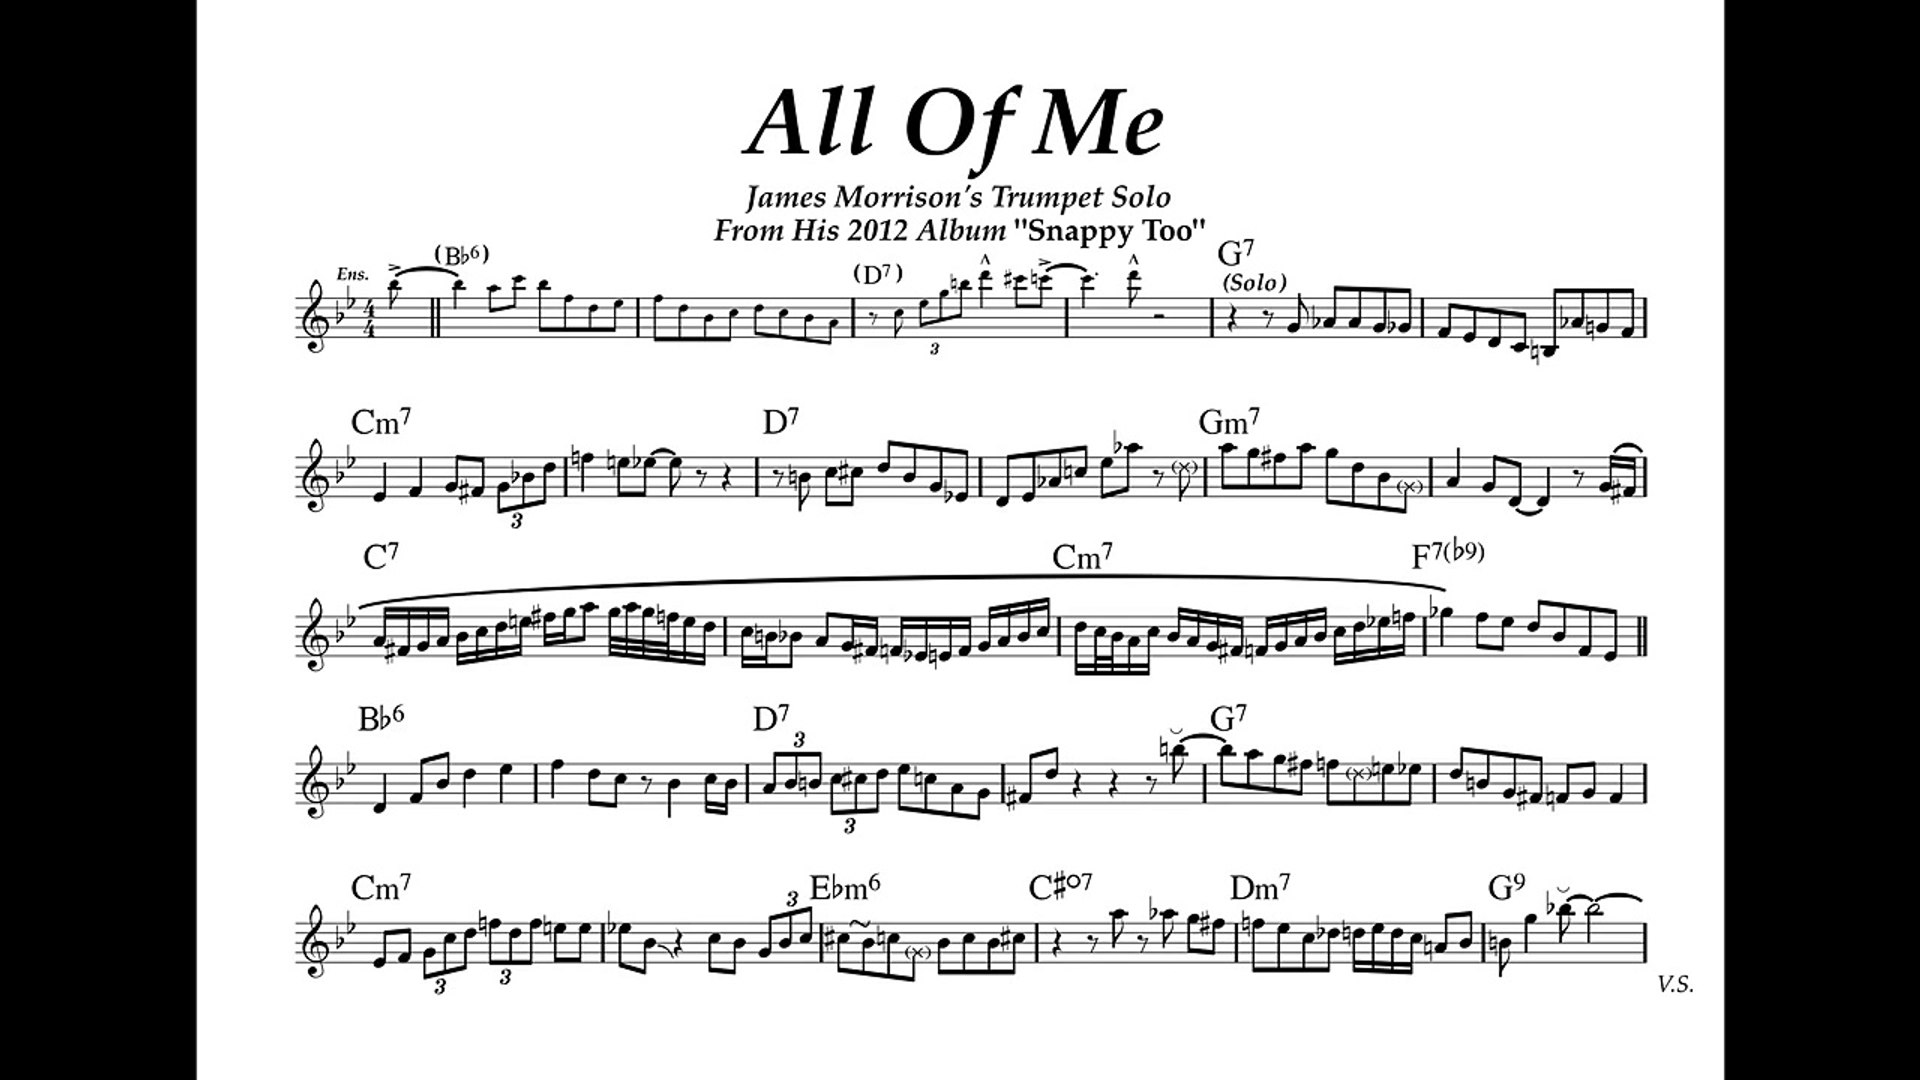 James Morrison: All Of Me (Trumpet Solo Transcription) - video Dailymotion